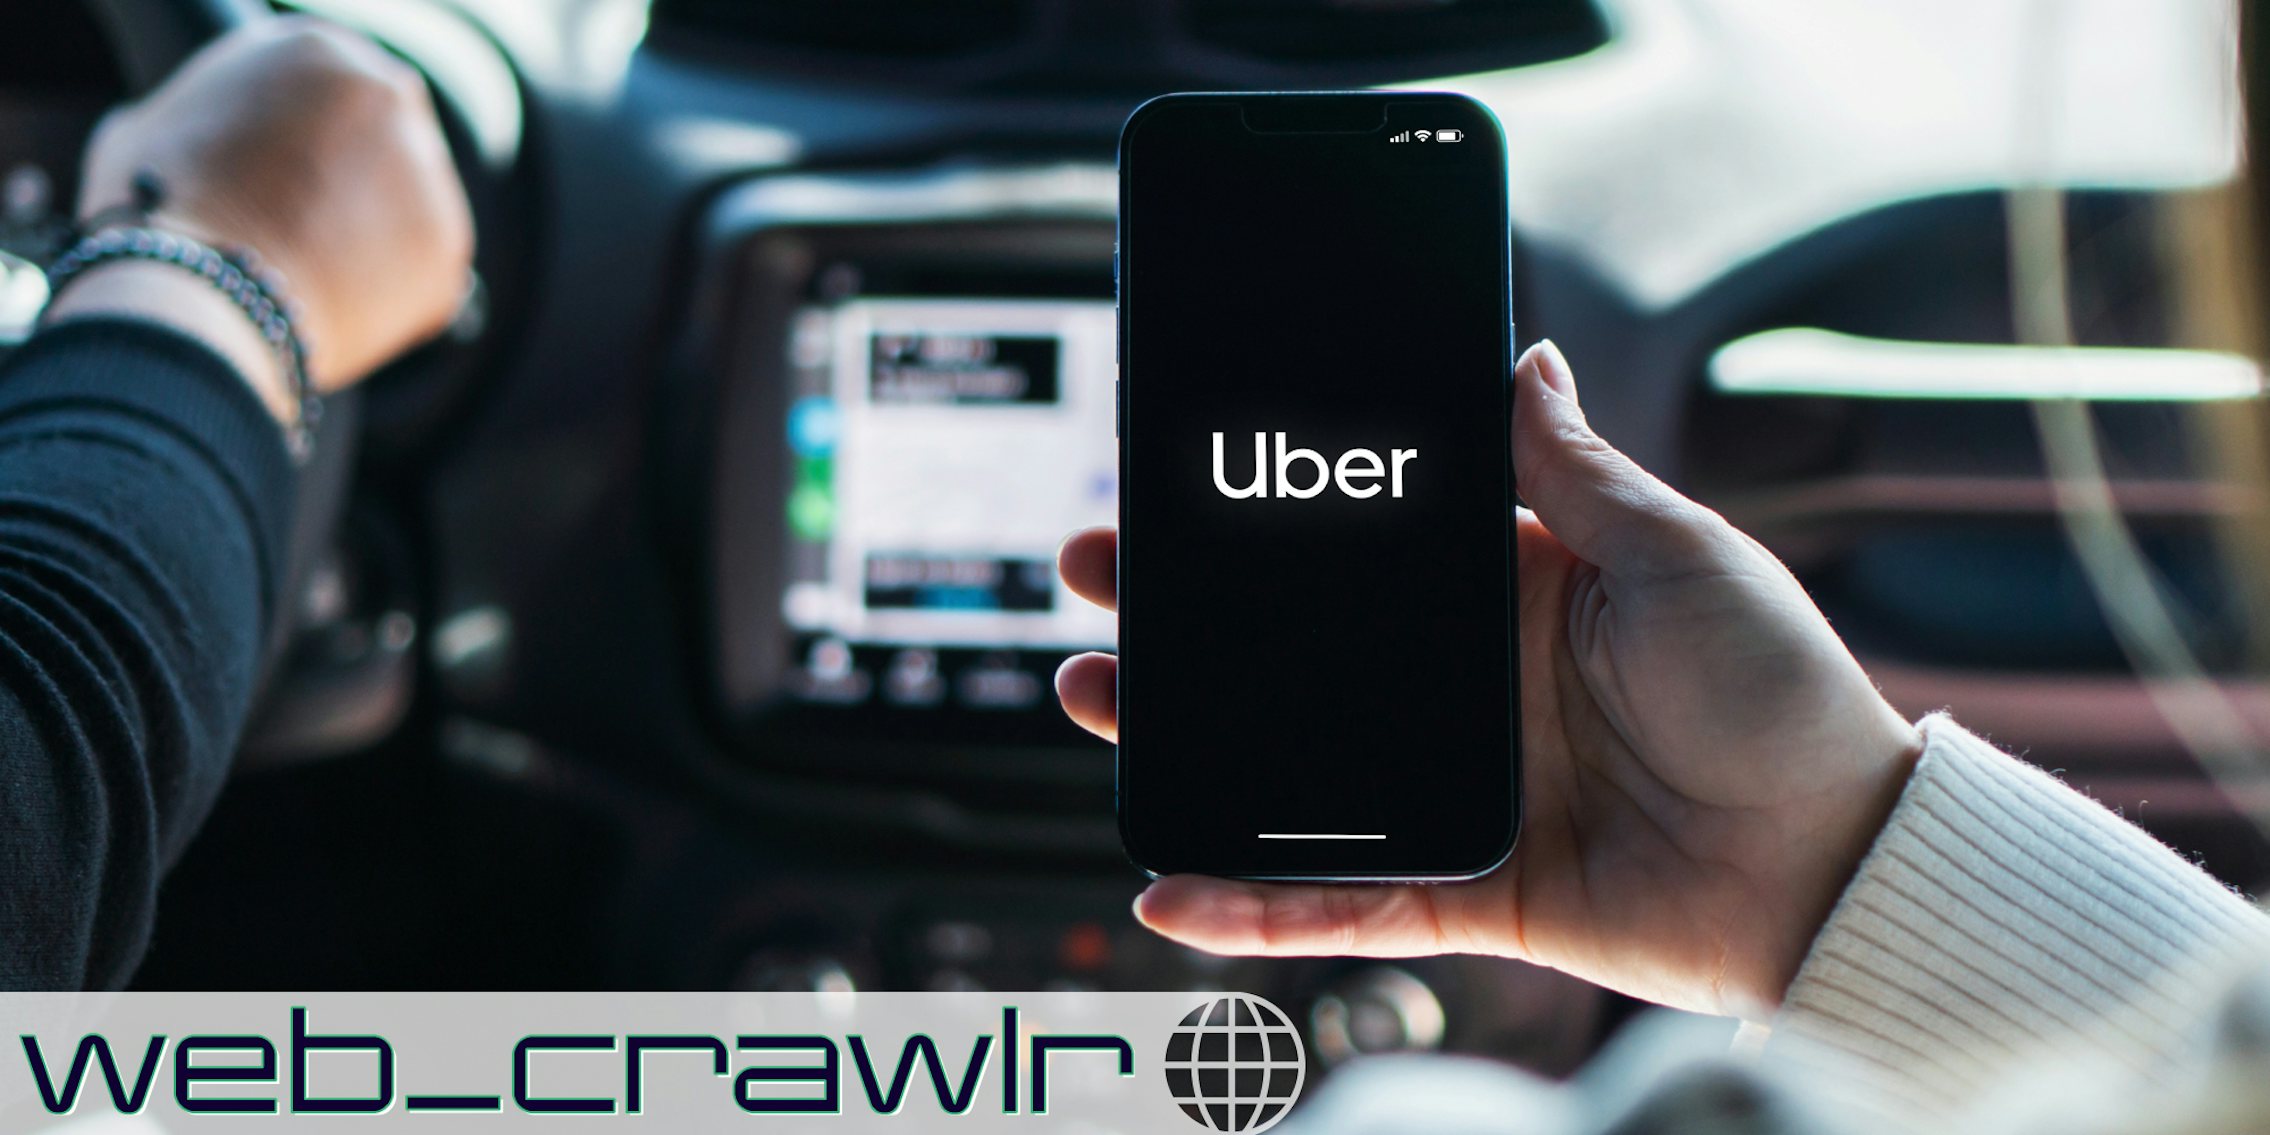 A person holding a phone with the Uber app on it while in a car. The Daily Dot newsletter web_crawlr logo is in the bottom left corner.